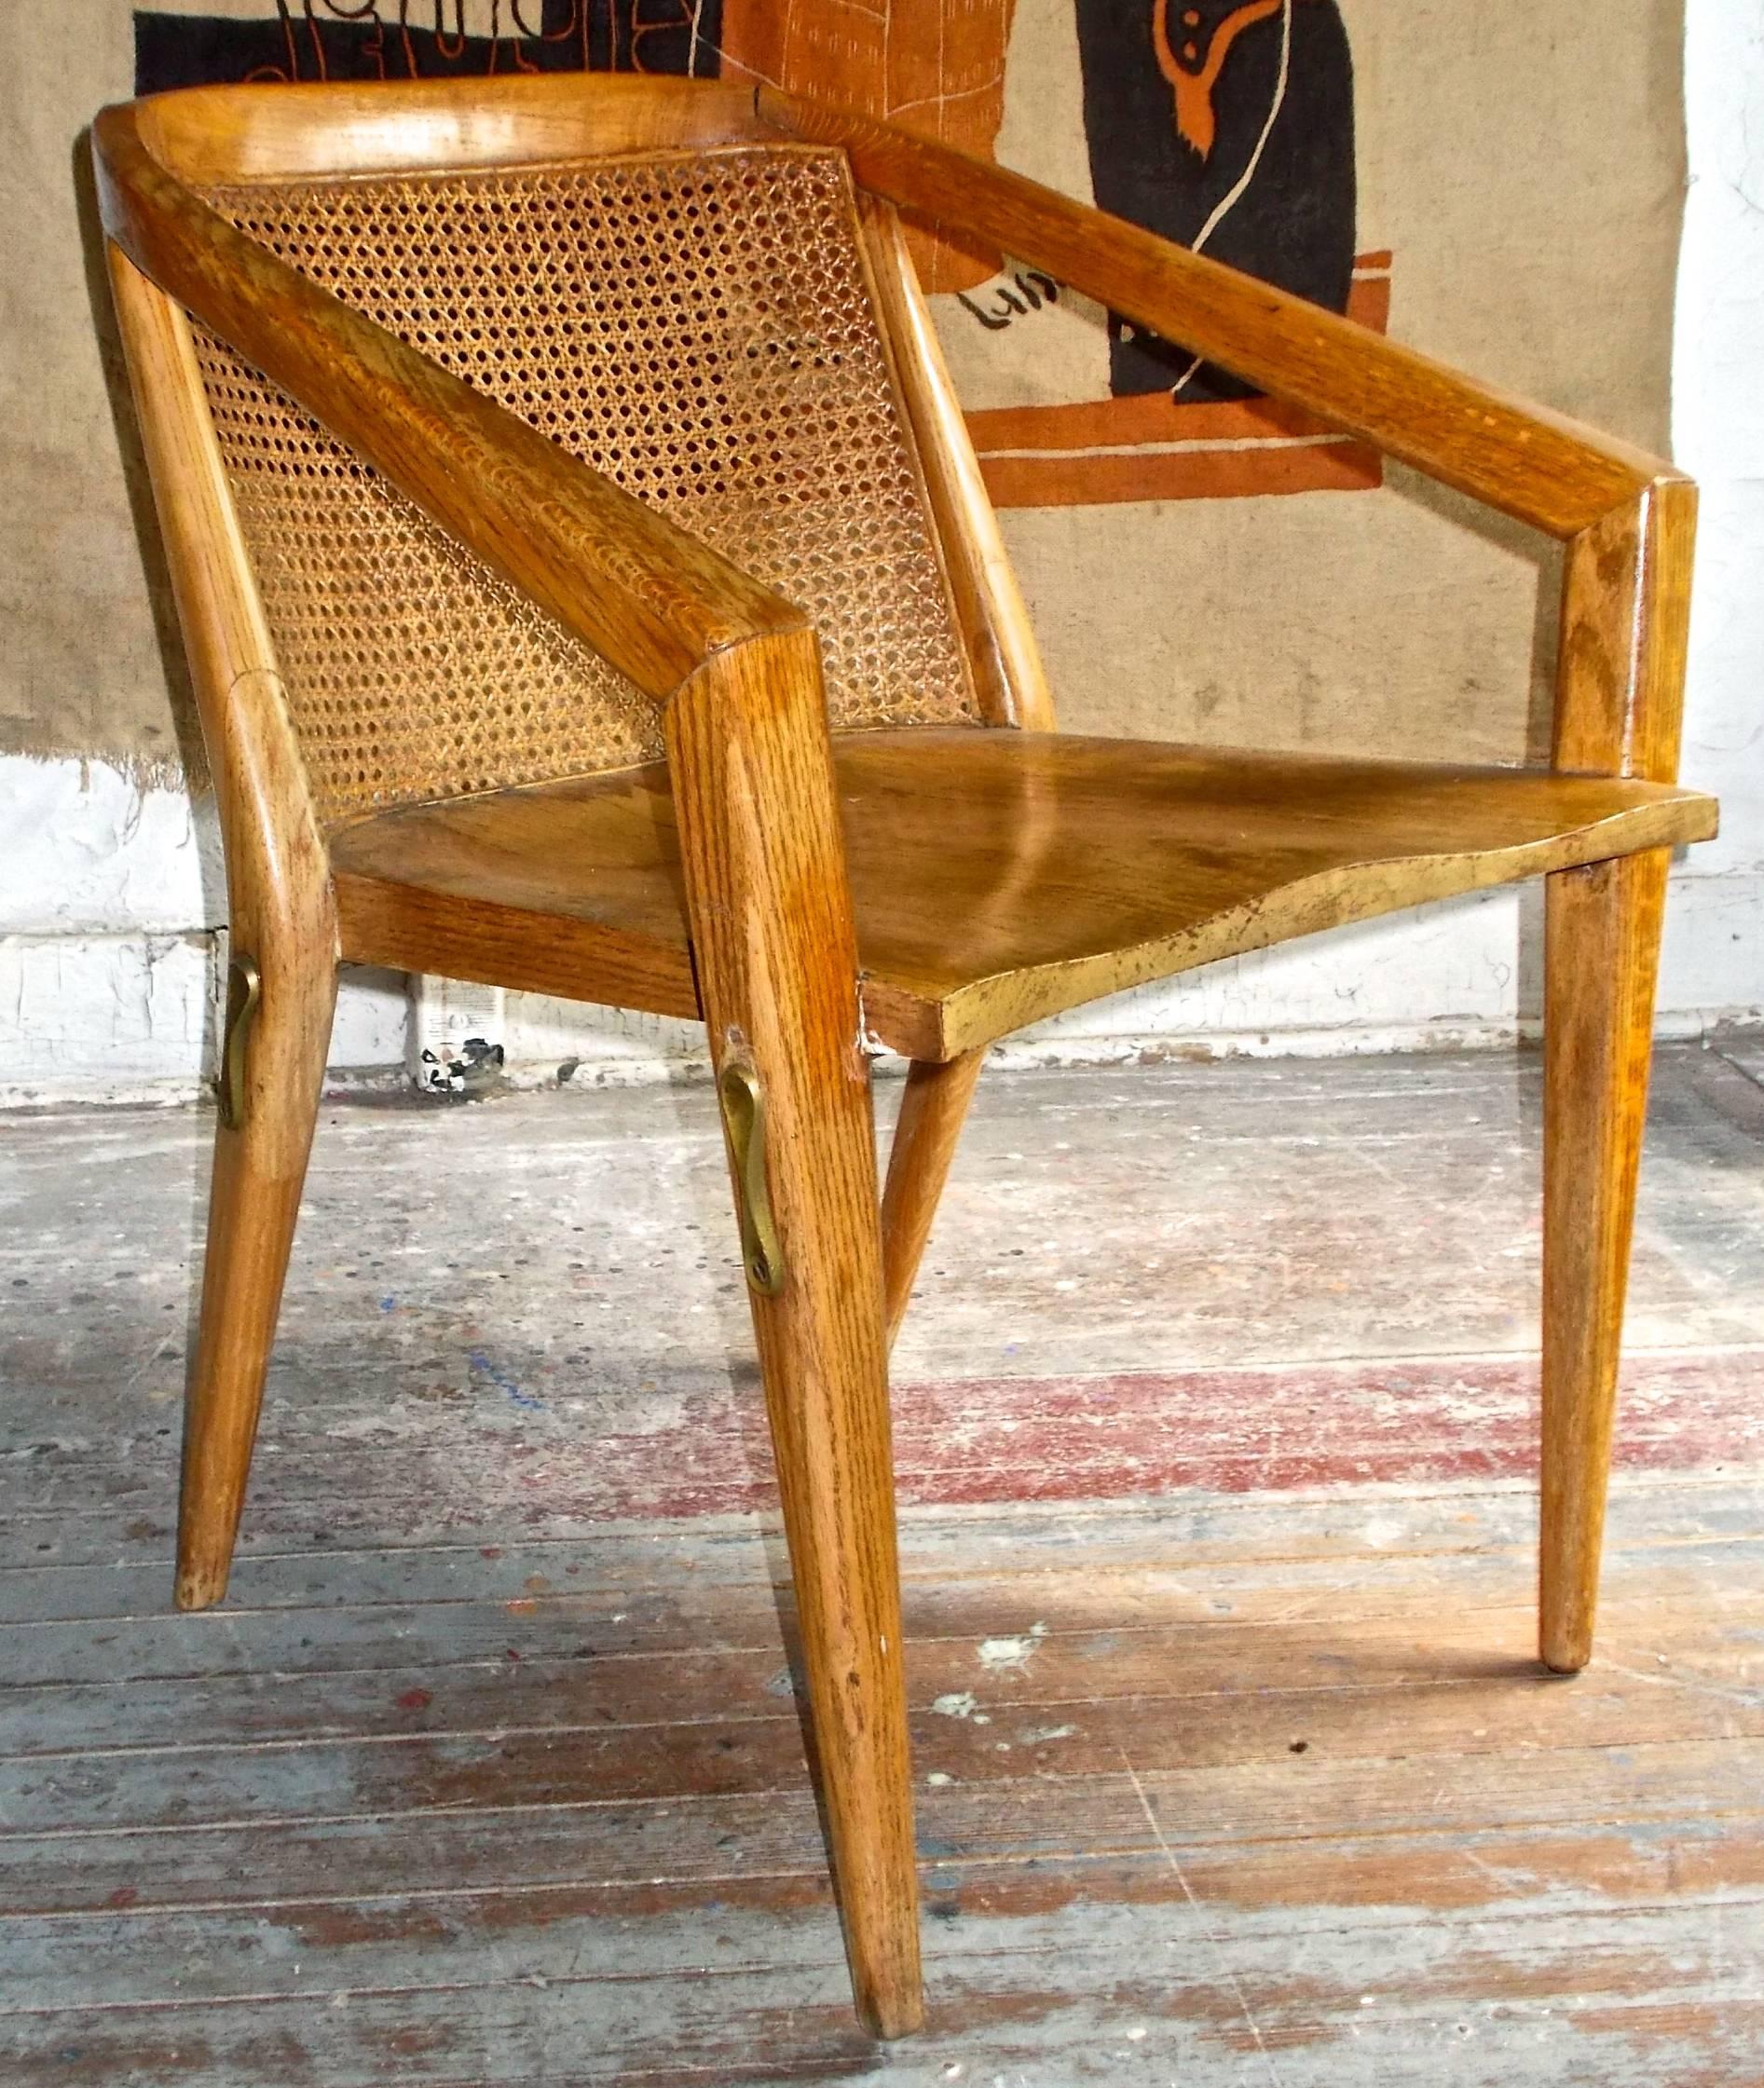 Important chair made in oak or ash with brass bracing under seat.